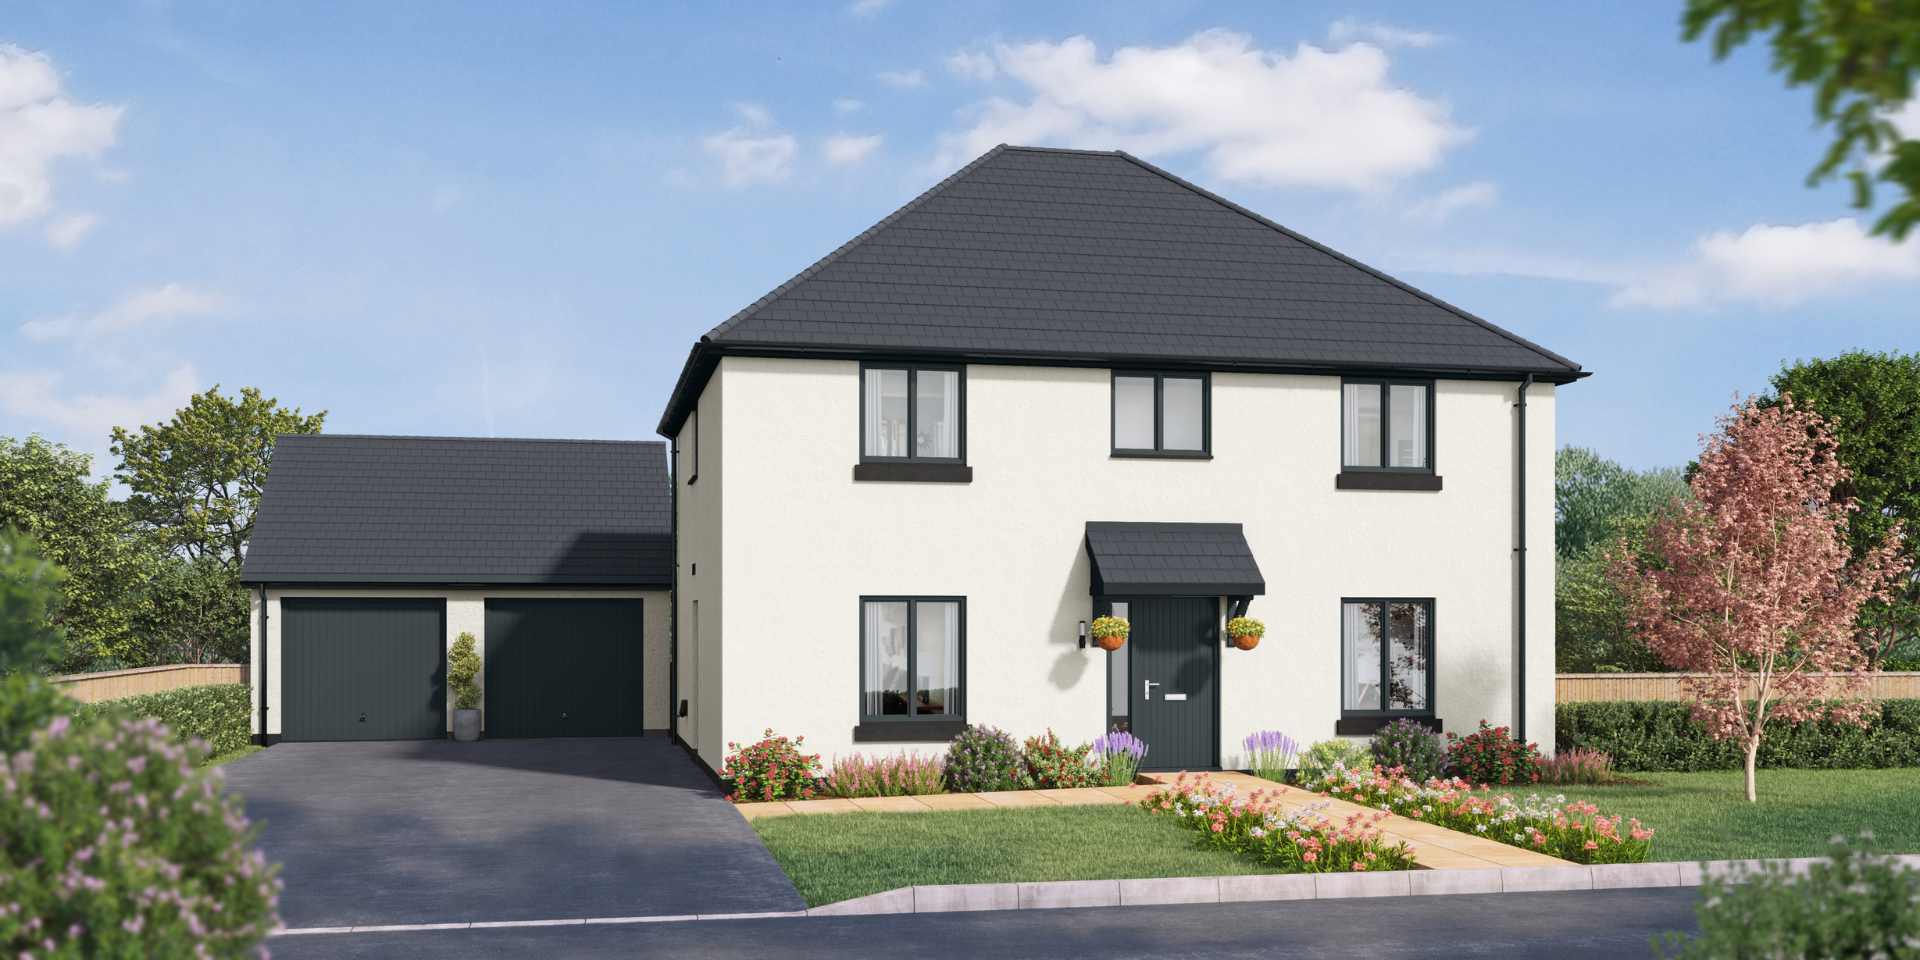 New Homes in Chudleigh Knighton Coming Soon!